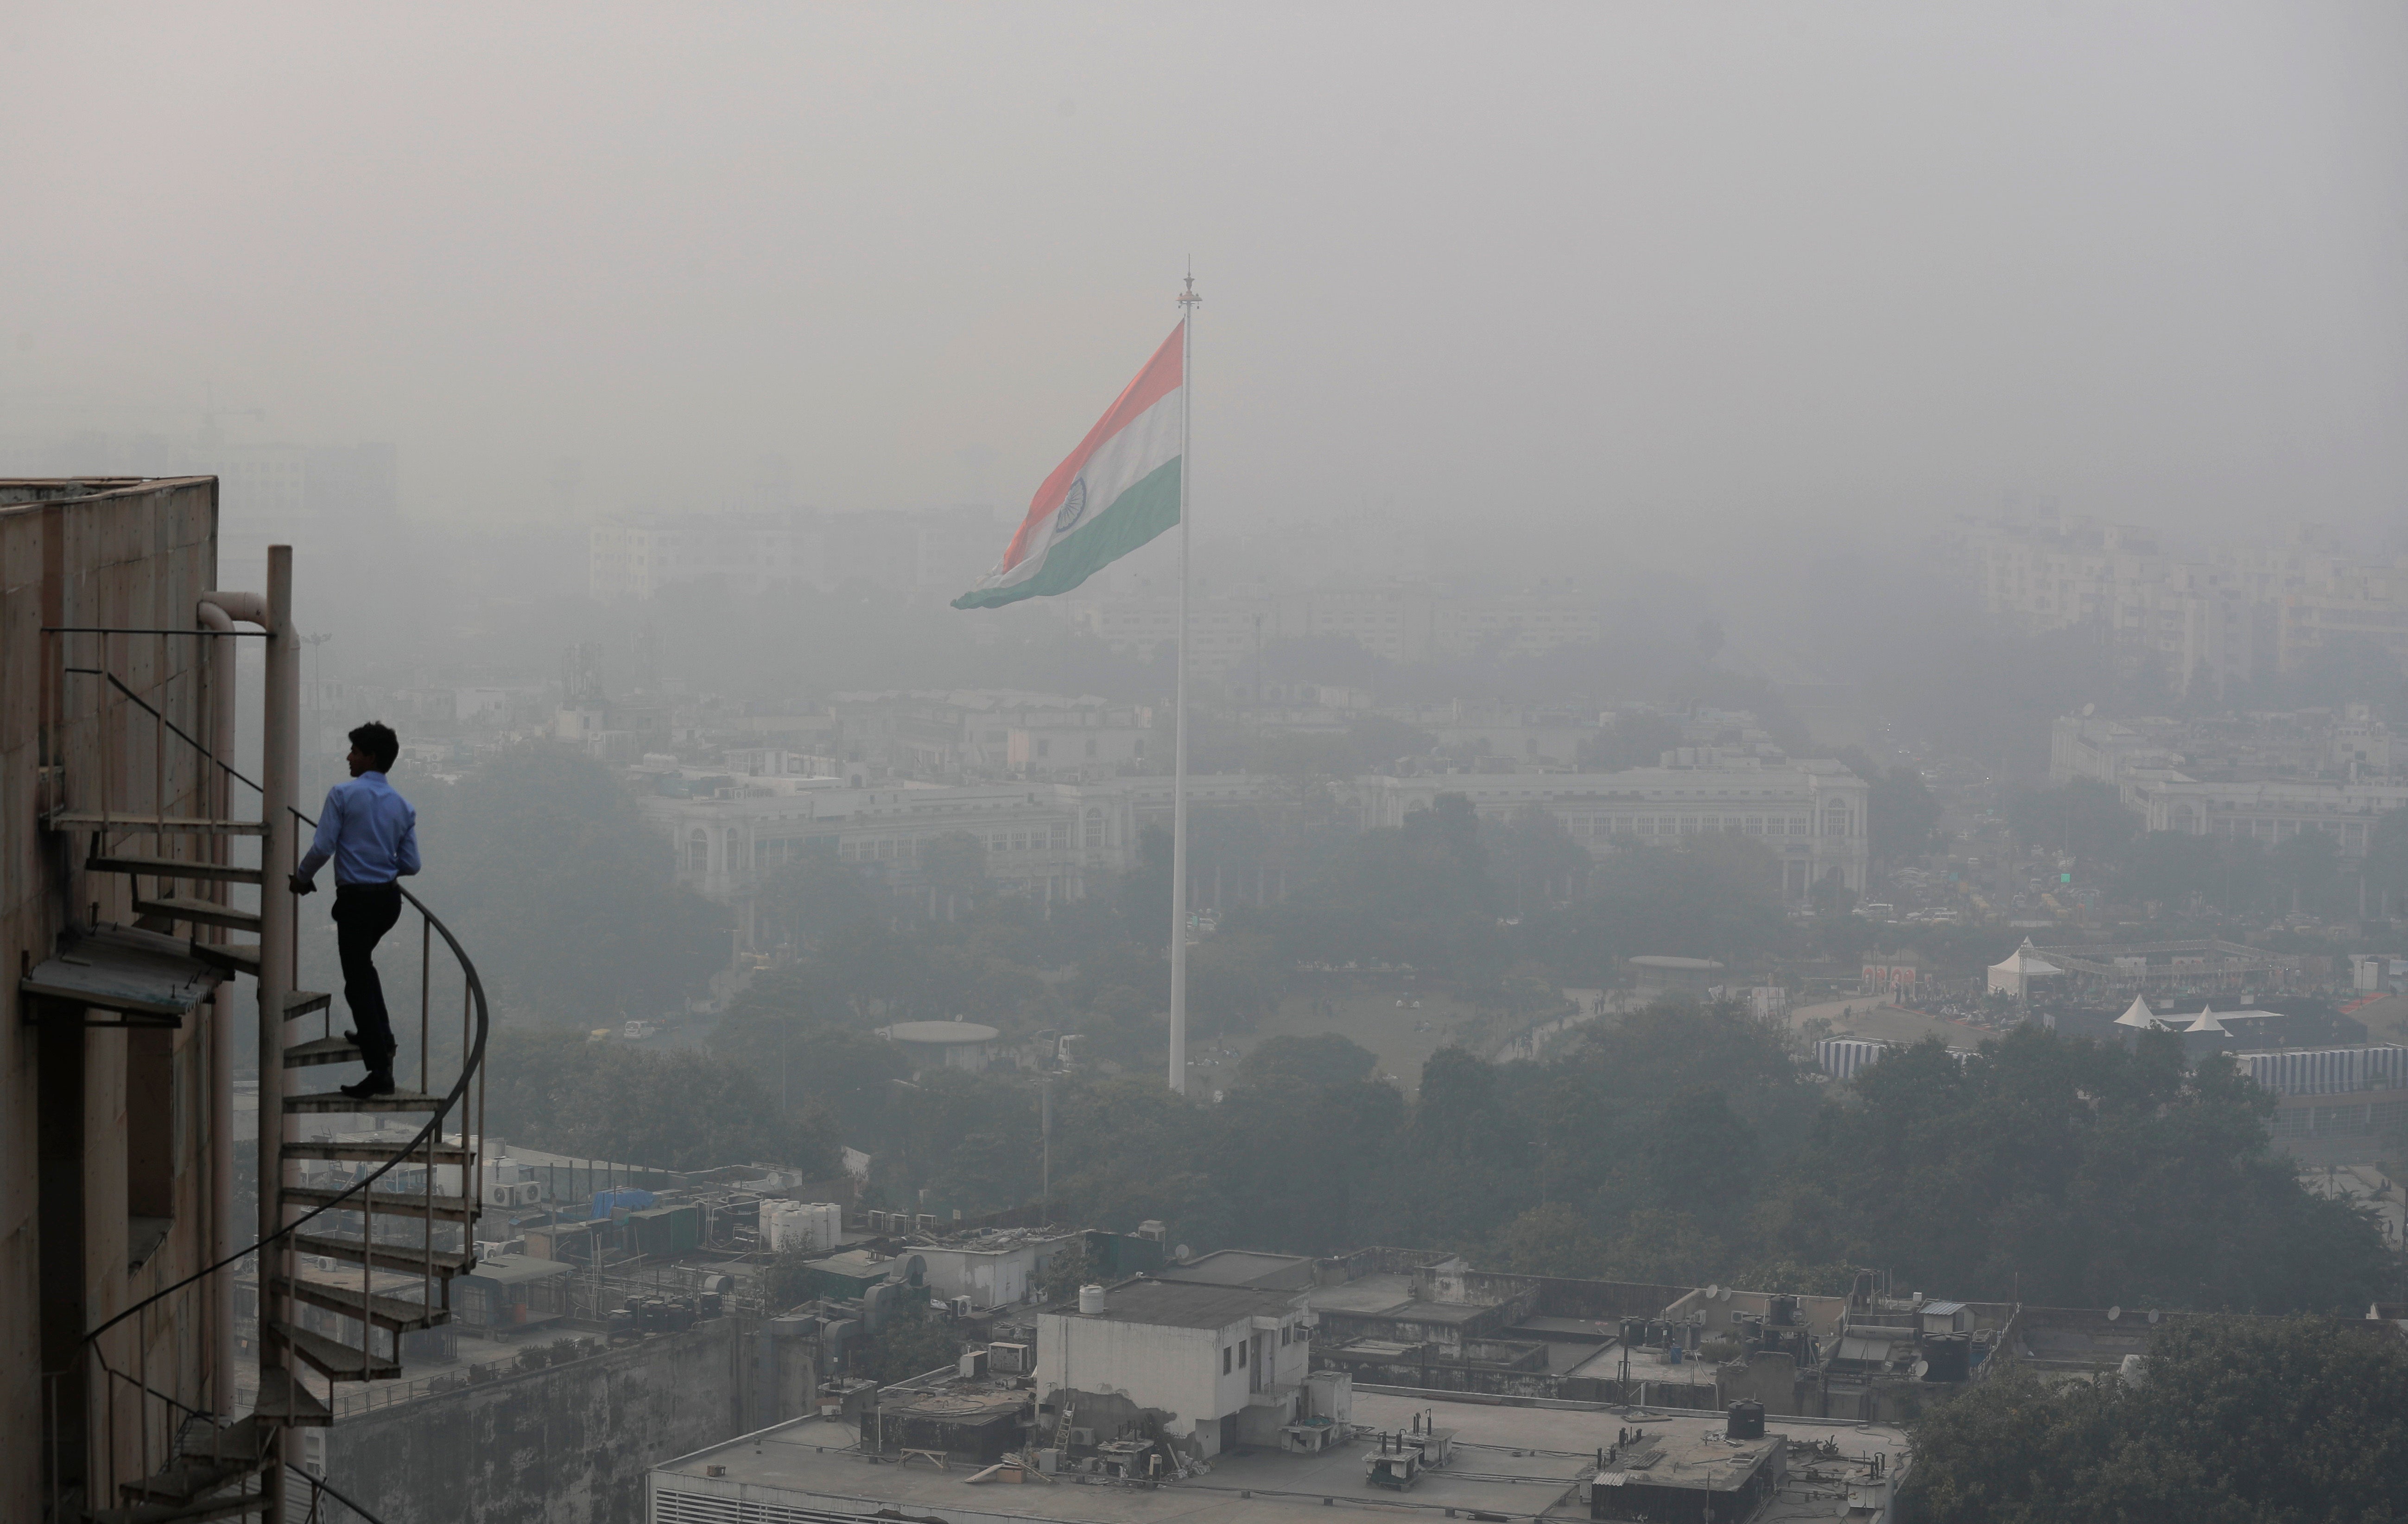 An Indian man walks up stairs as Delhi’s skyline is seen enveloped in smog and dust